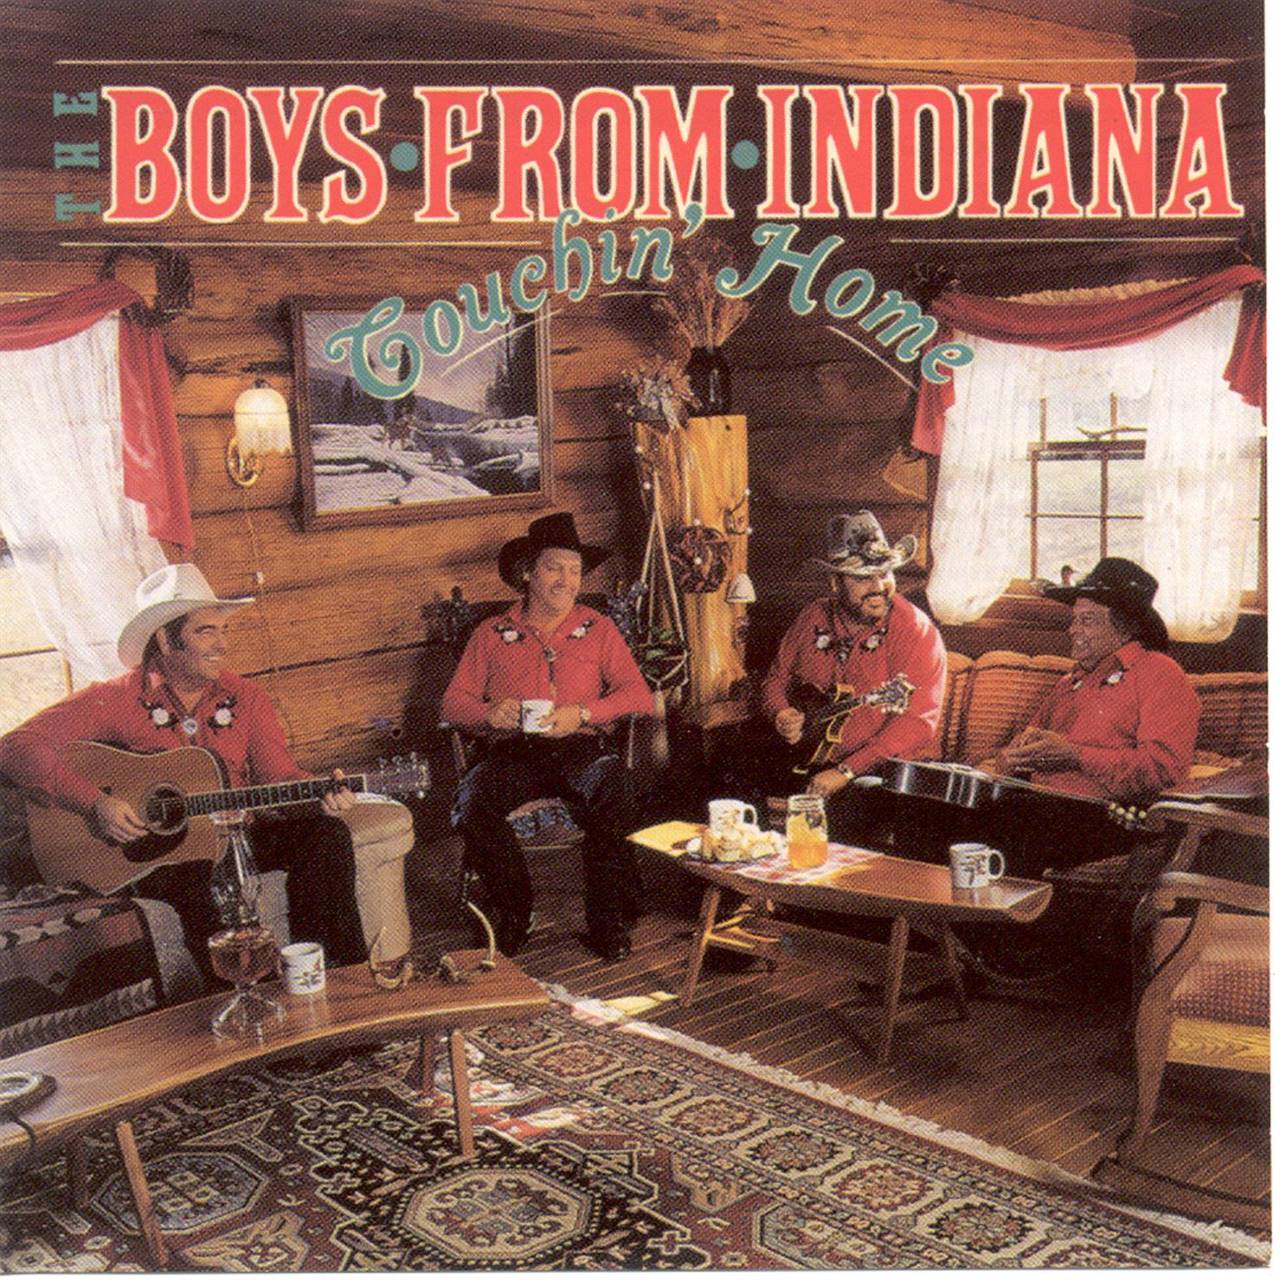 Boys From Indiana - Touching Home cover album